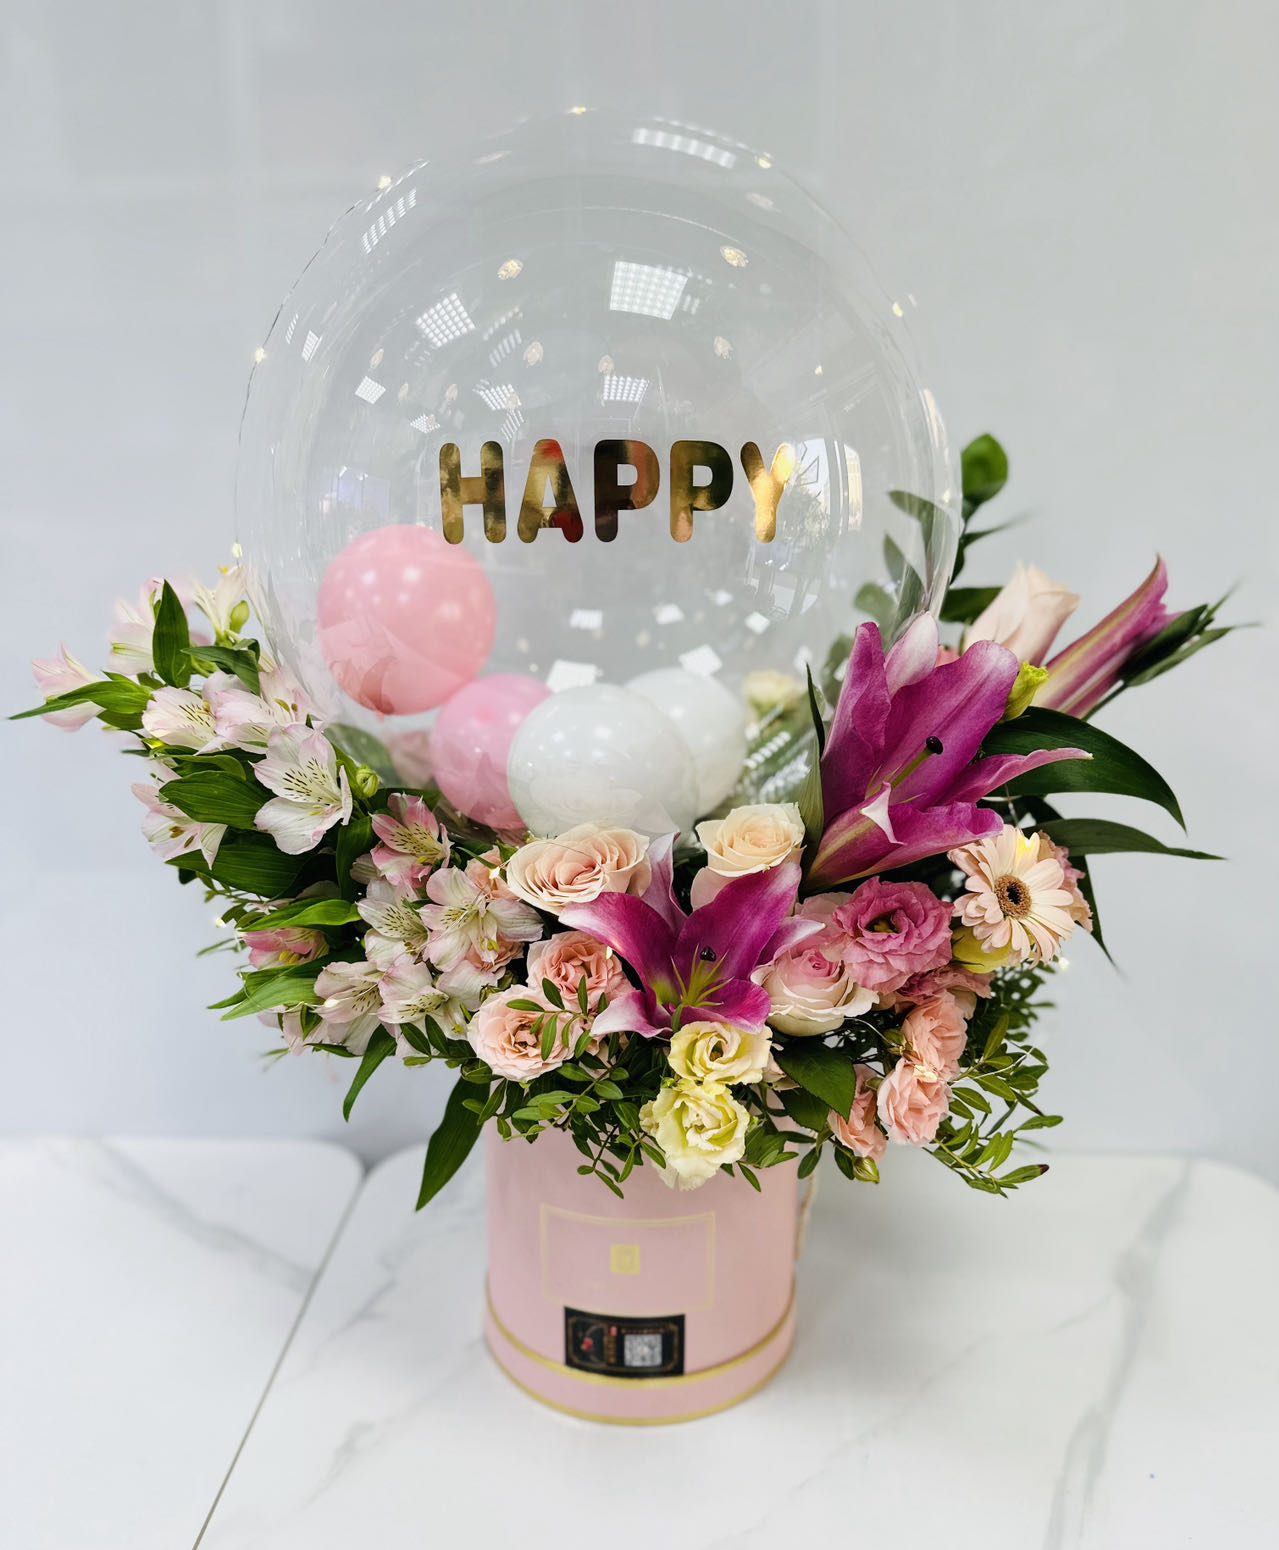 Happy Birthday Box with Lily amd Bobo balloons | Flower Gift Center